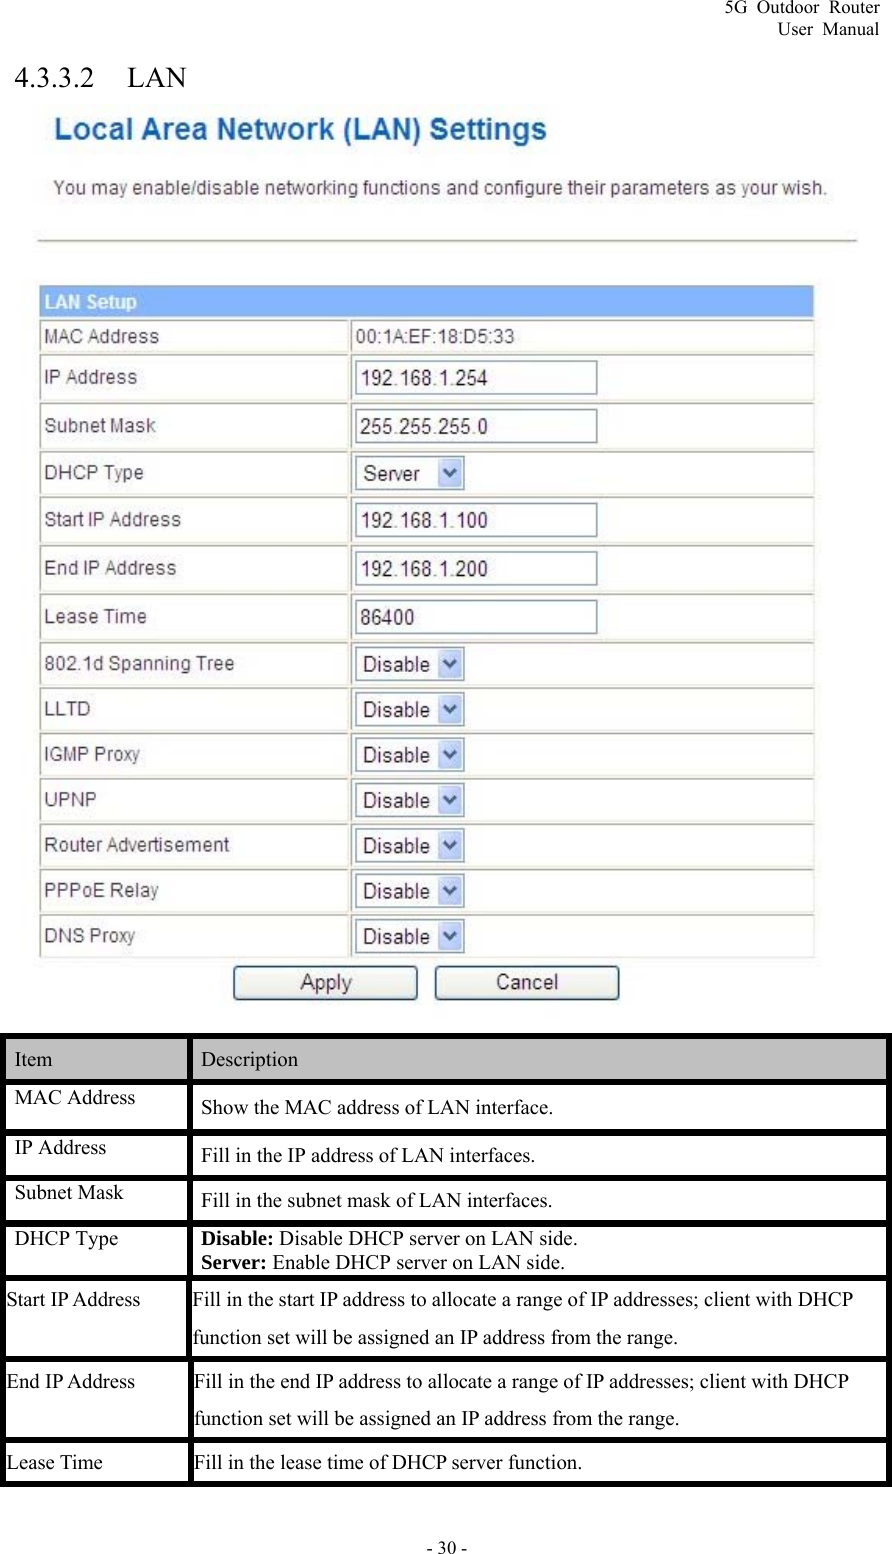 5G Outdoor Router User Manual - 30 - 4.3.3.2 LAN  Item   Description  MAC Address  Show the MAC address of LAN interface. IP Address  Fill in the IP address of LAN interfaces. Subnet Mask  Fill in the subnet mask of LAN interfaces. DHCP Type  Disable: Disable DHCP server on LAN side. Server: Enable DHCP server on LAN side. Start IP Address  Fill in the start IP address to allocate a range of IP addresses; client with DHCP function set will be assigned an IP address from the range. End IP Address  Fill in the end IP address to allocate a range of IP addresses; client with DHCP function set will be assigned an IP address from the range. Lease Time  Fill in the lease time of DHCP server function. 